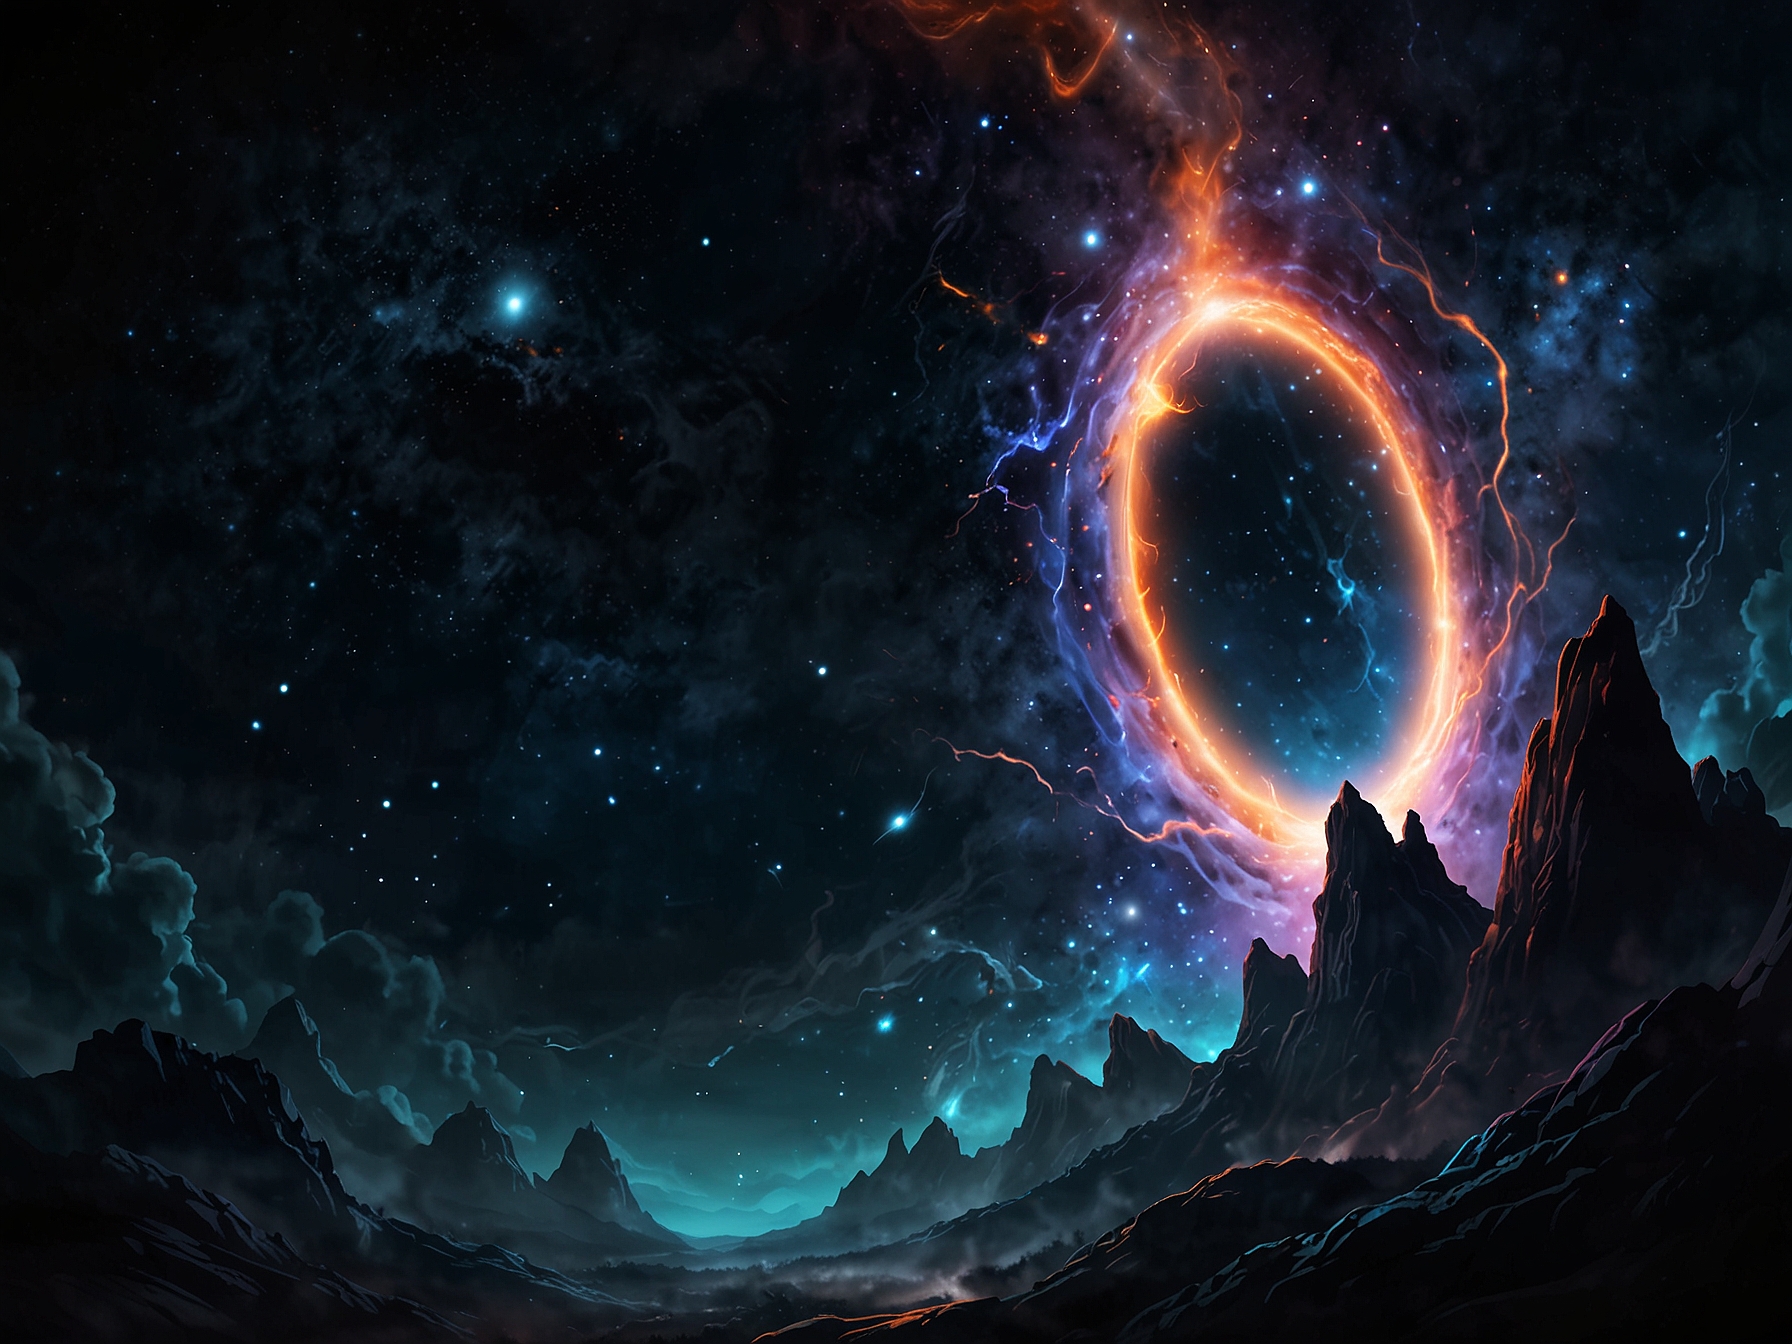 An illustration depicting the Maw emitting cosmic energy, highlighting its power and reach.